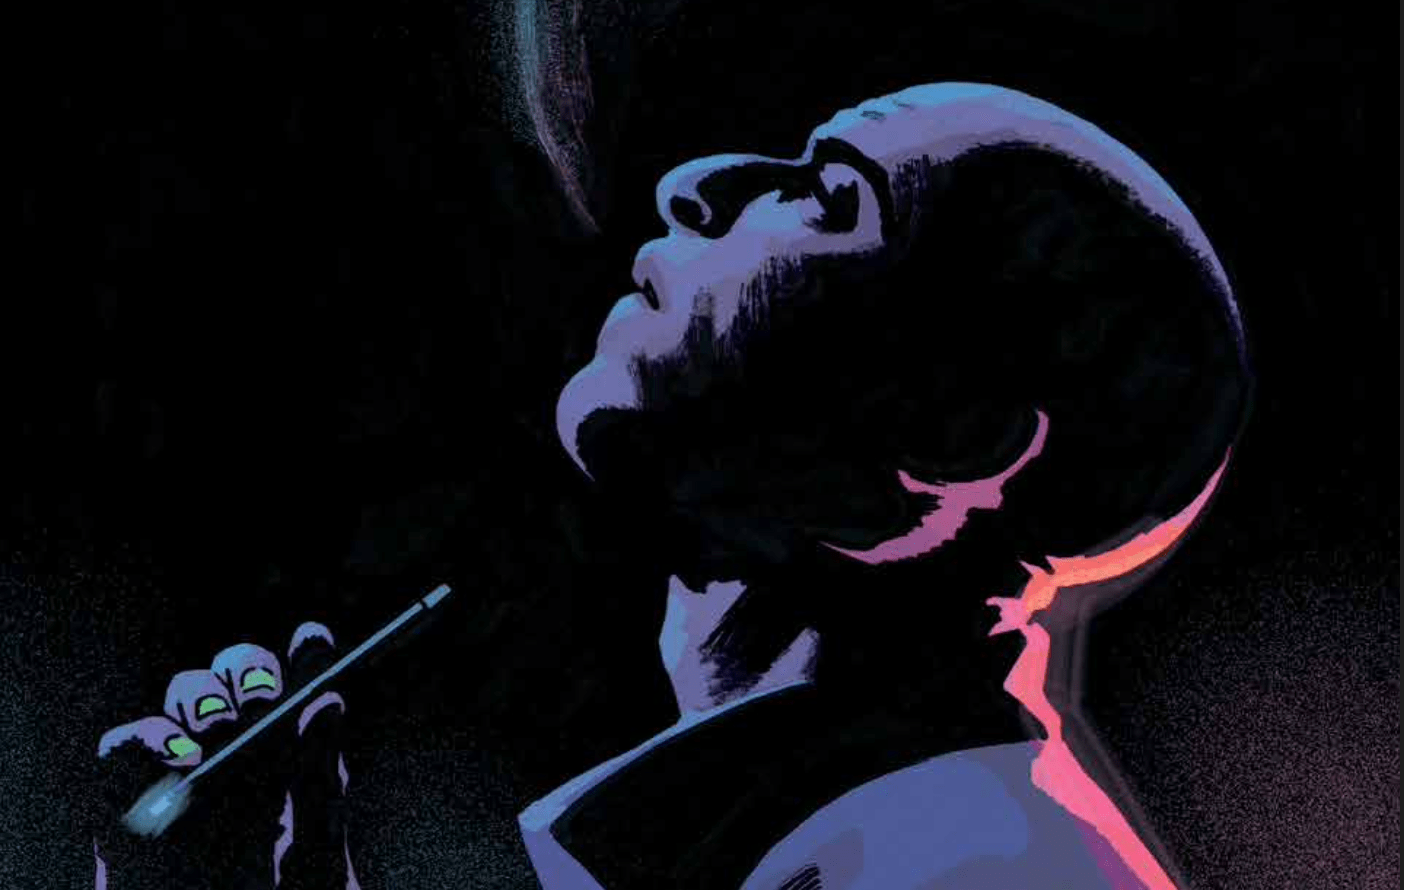 'The Deviant' #6 is a good thriller